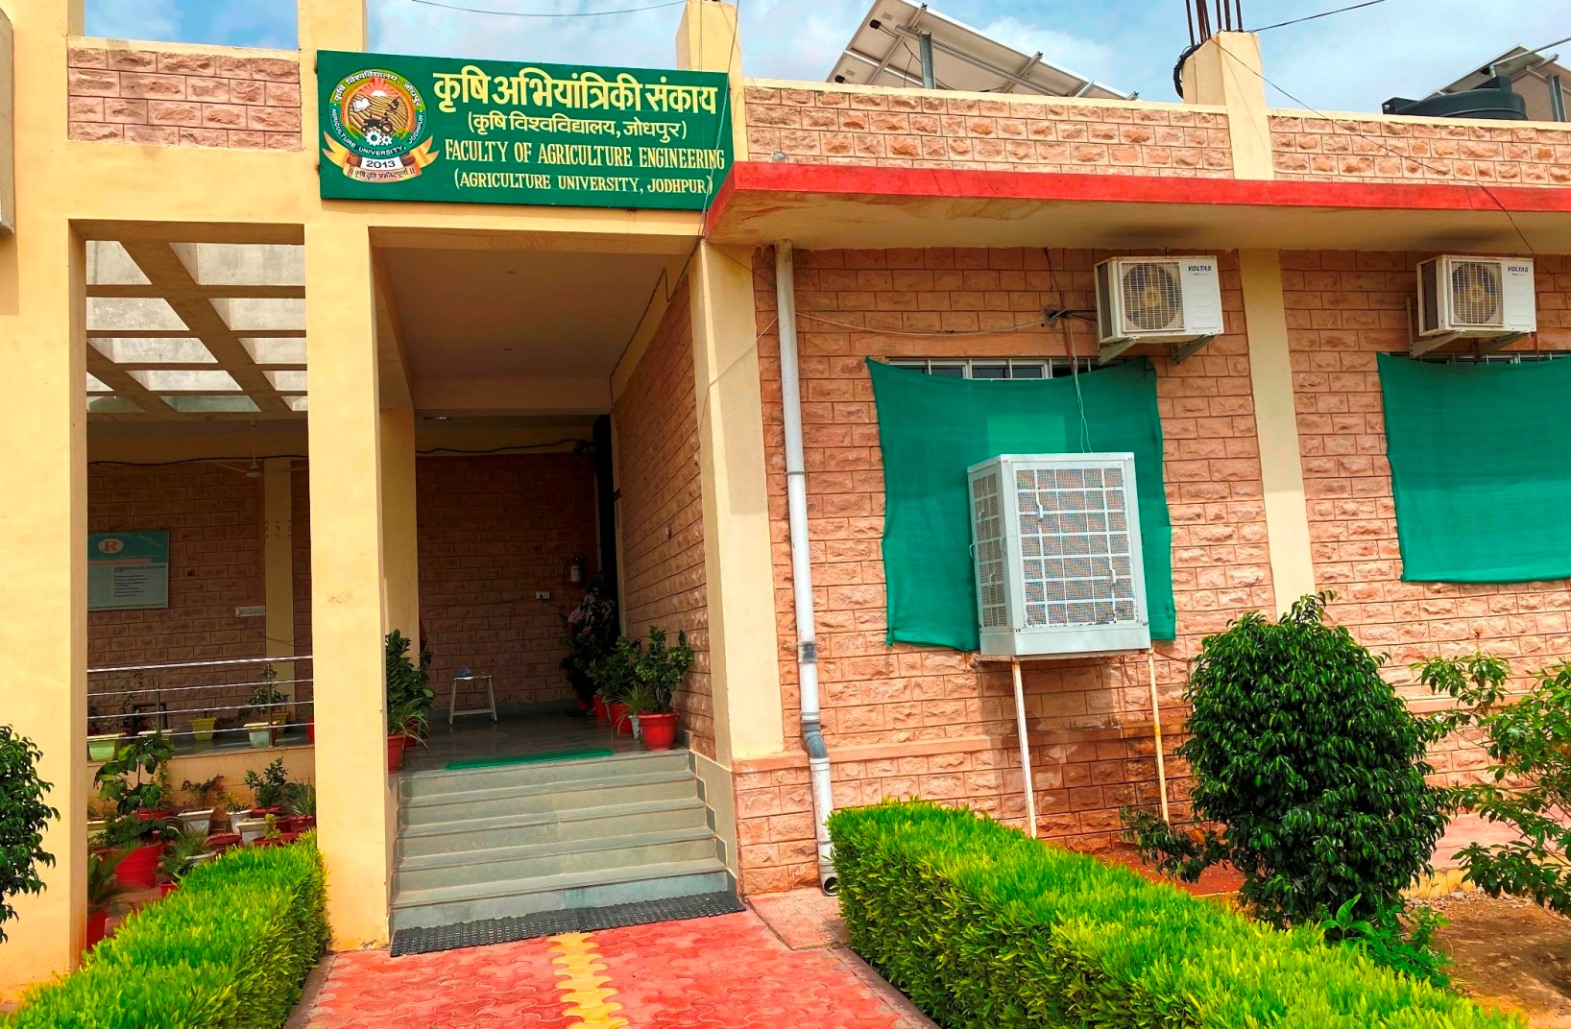 College of Technology and Agriculture Engineering Jodhpur Agriculture University, Jodhpur